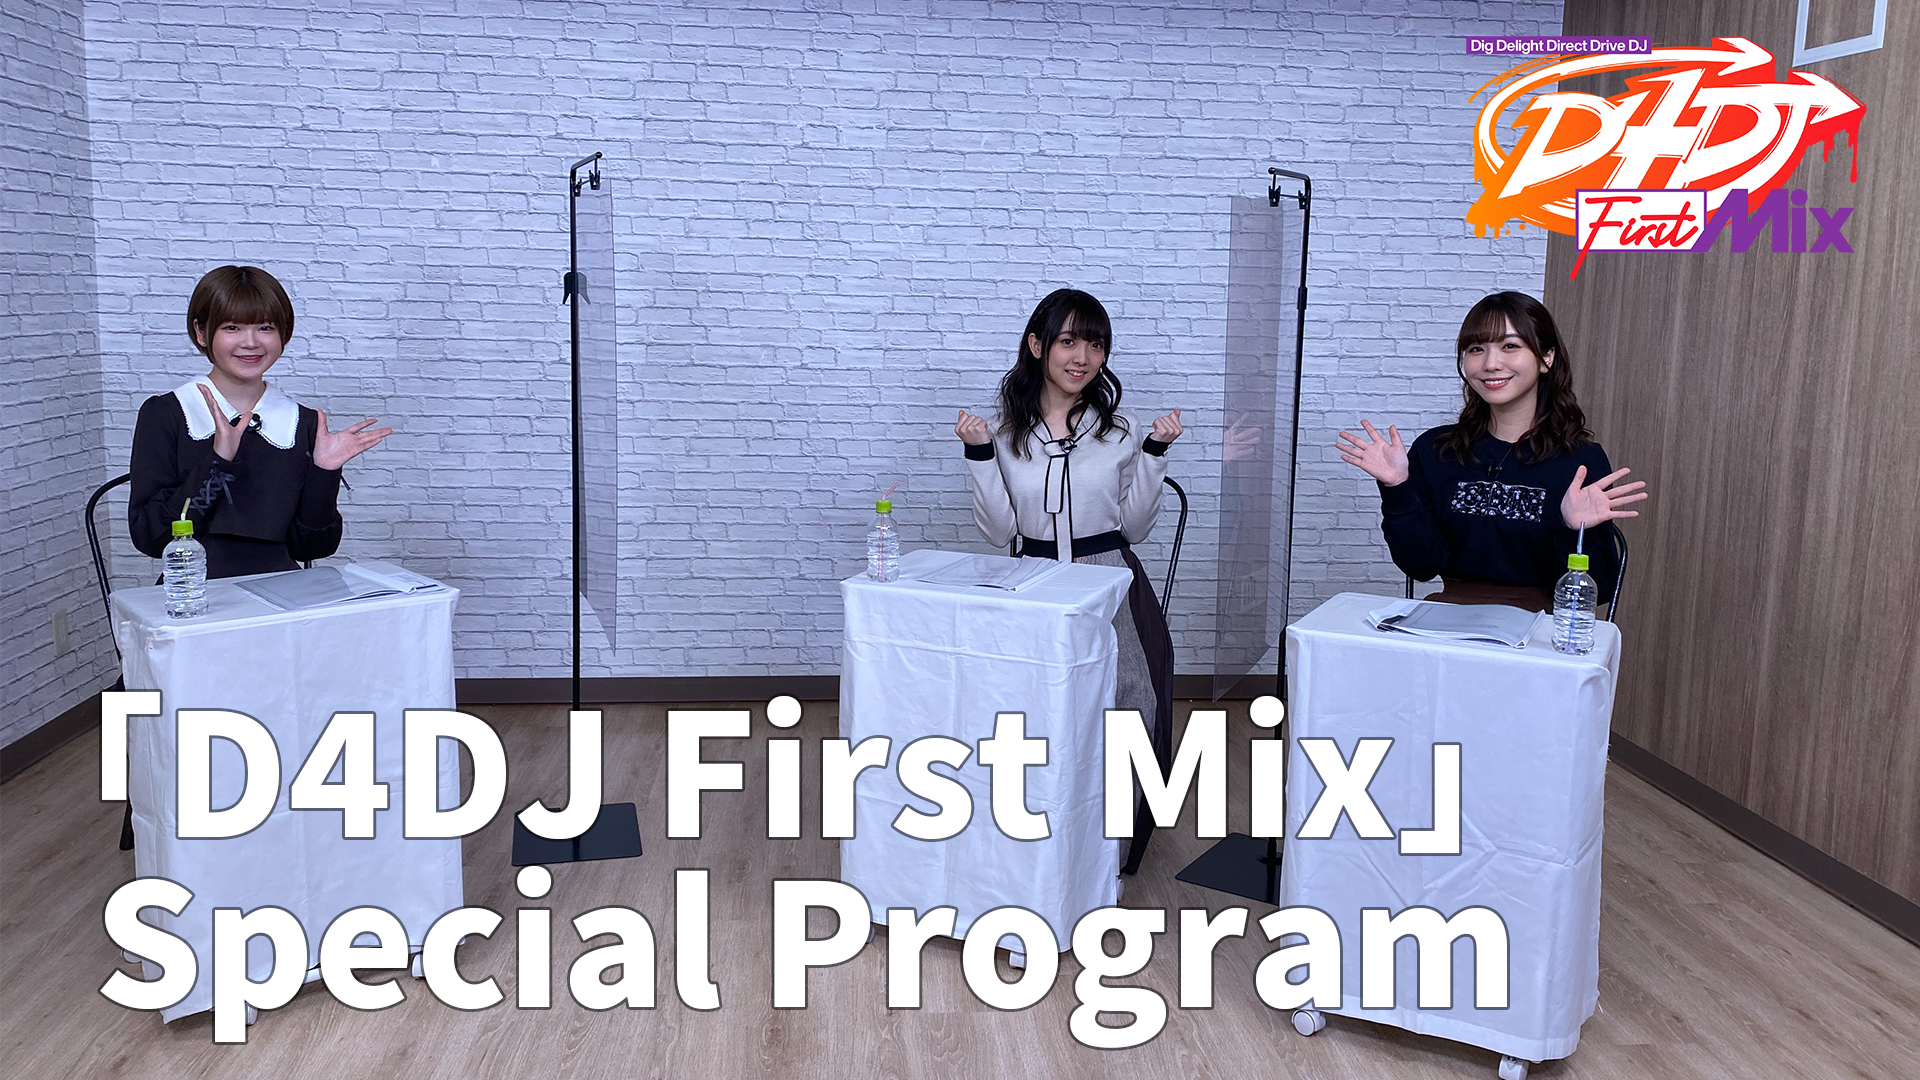 『D4DJ First Mix』Special Programより (C)bushiroad All Rights Reserved. (C) Donuts Co. Ltd. All rights reserved.